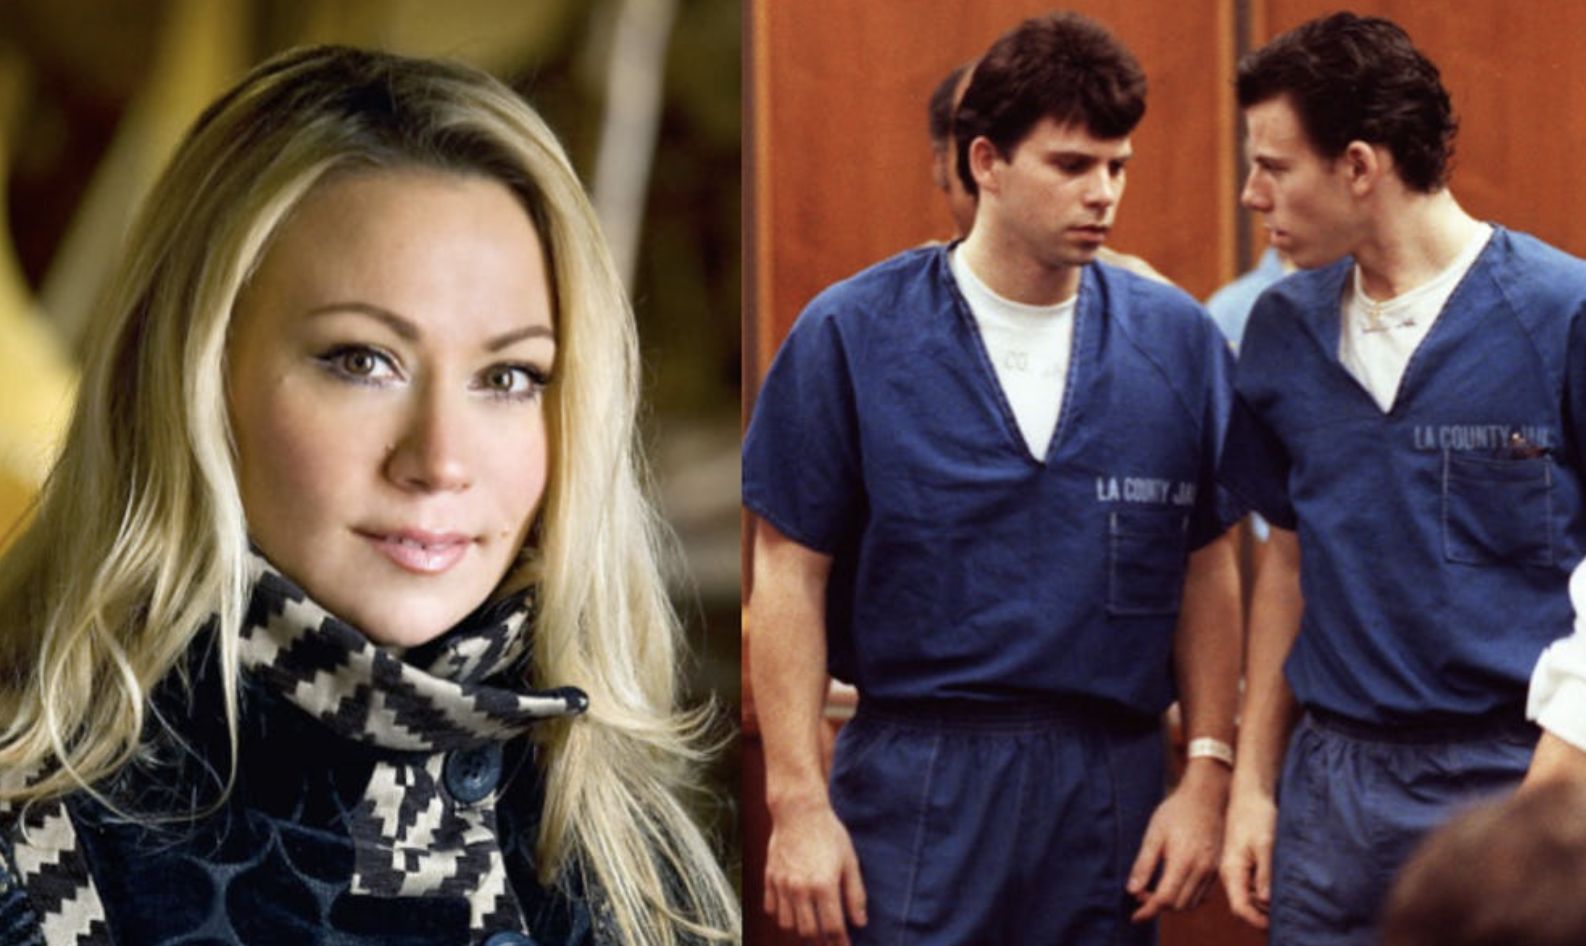 Anna Eriksson and the Menendez brothers